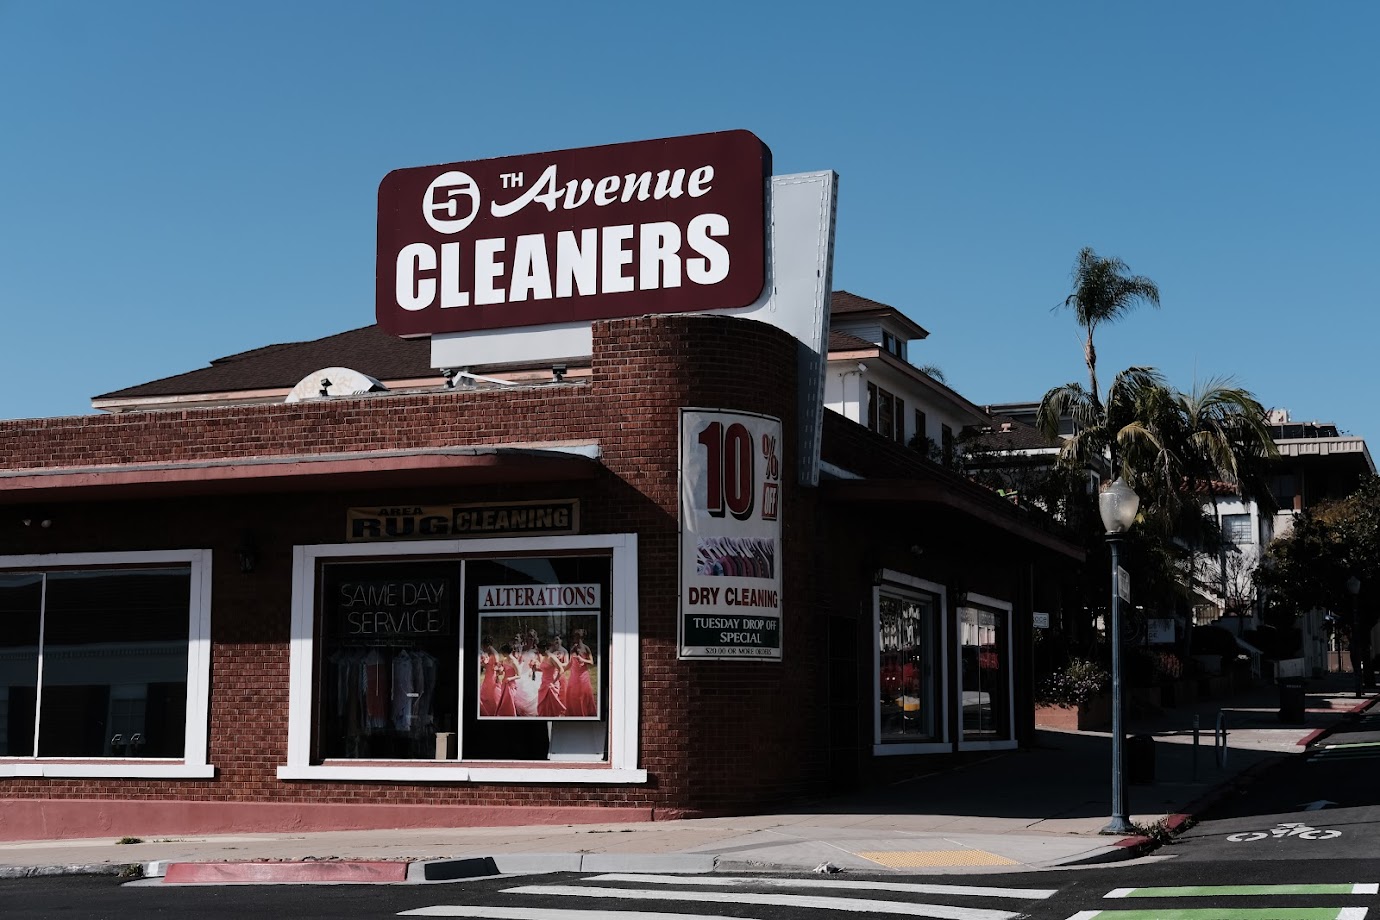 5th Avenue Cleaners